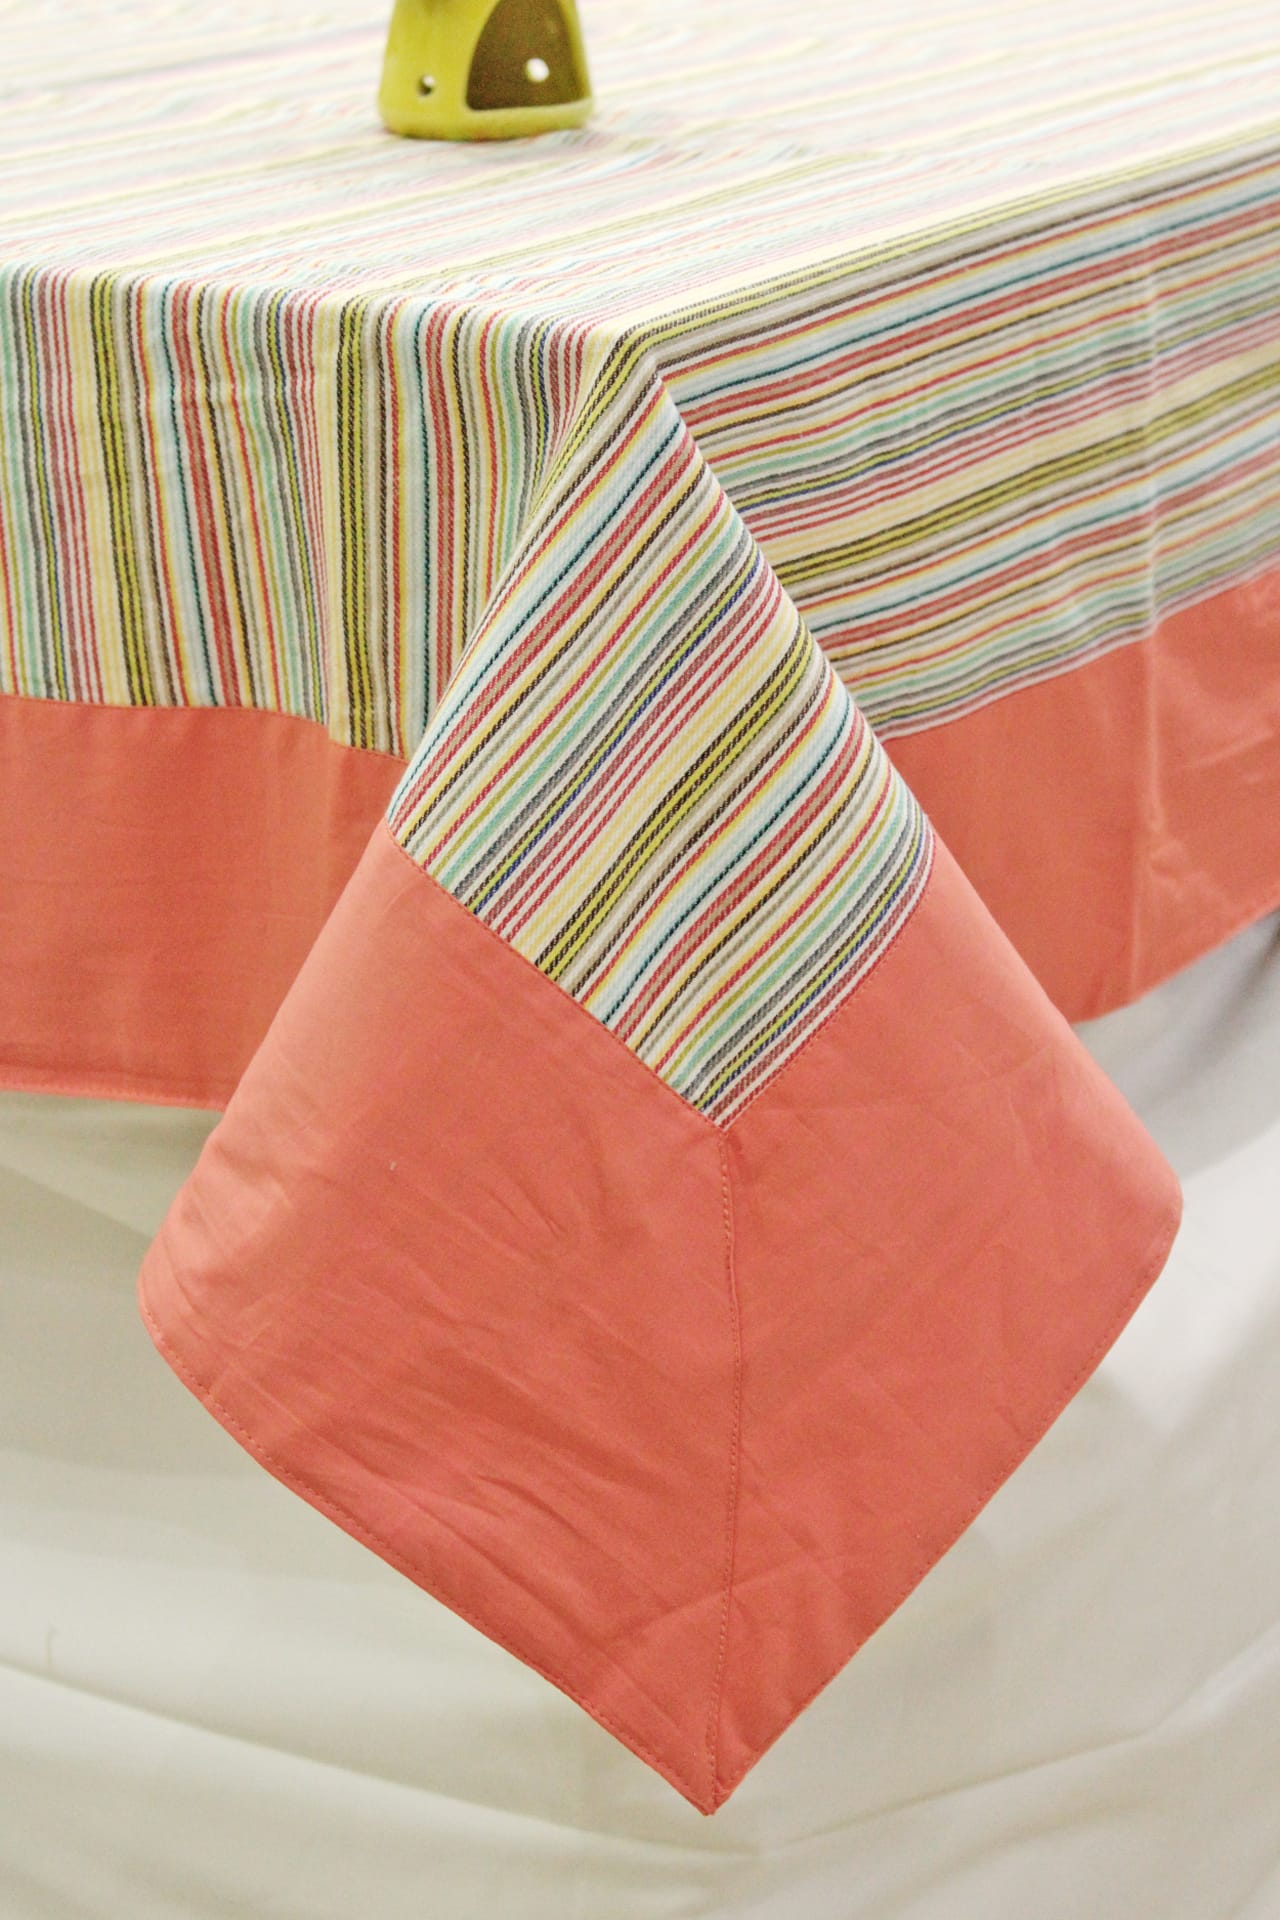 Alpha Peach Woven Cotton Stripes Table Cover(1 Pc) online in India